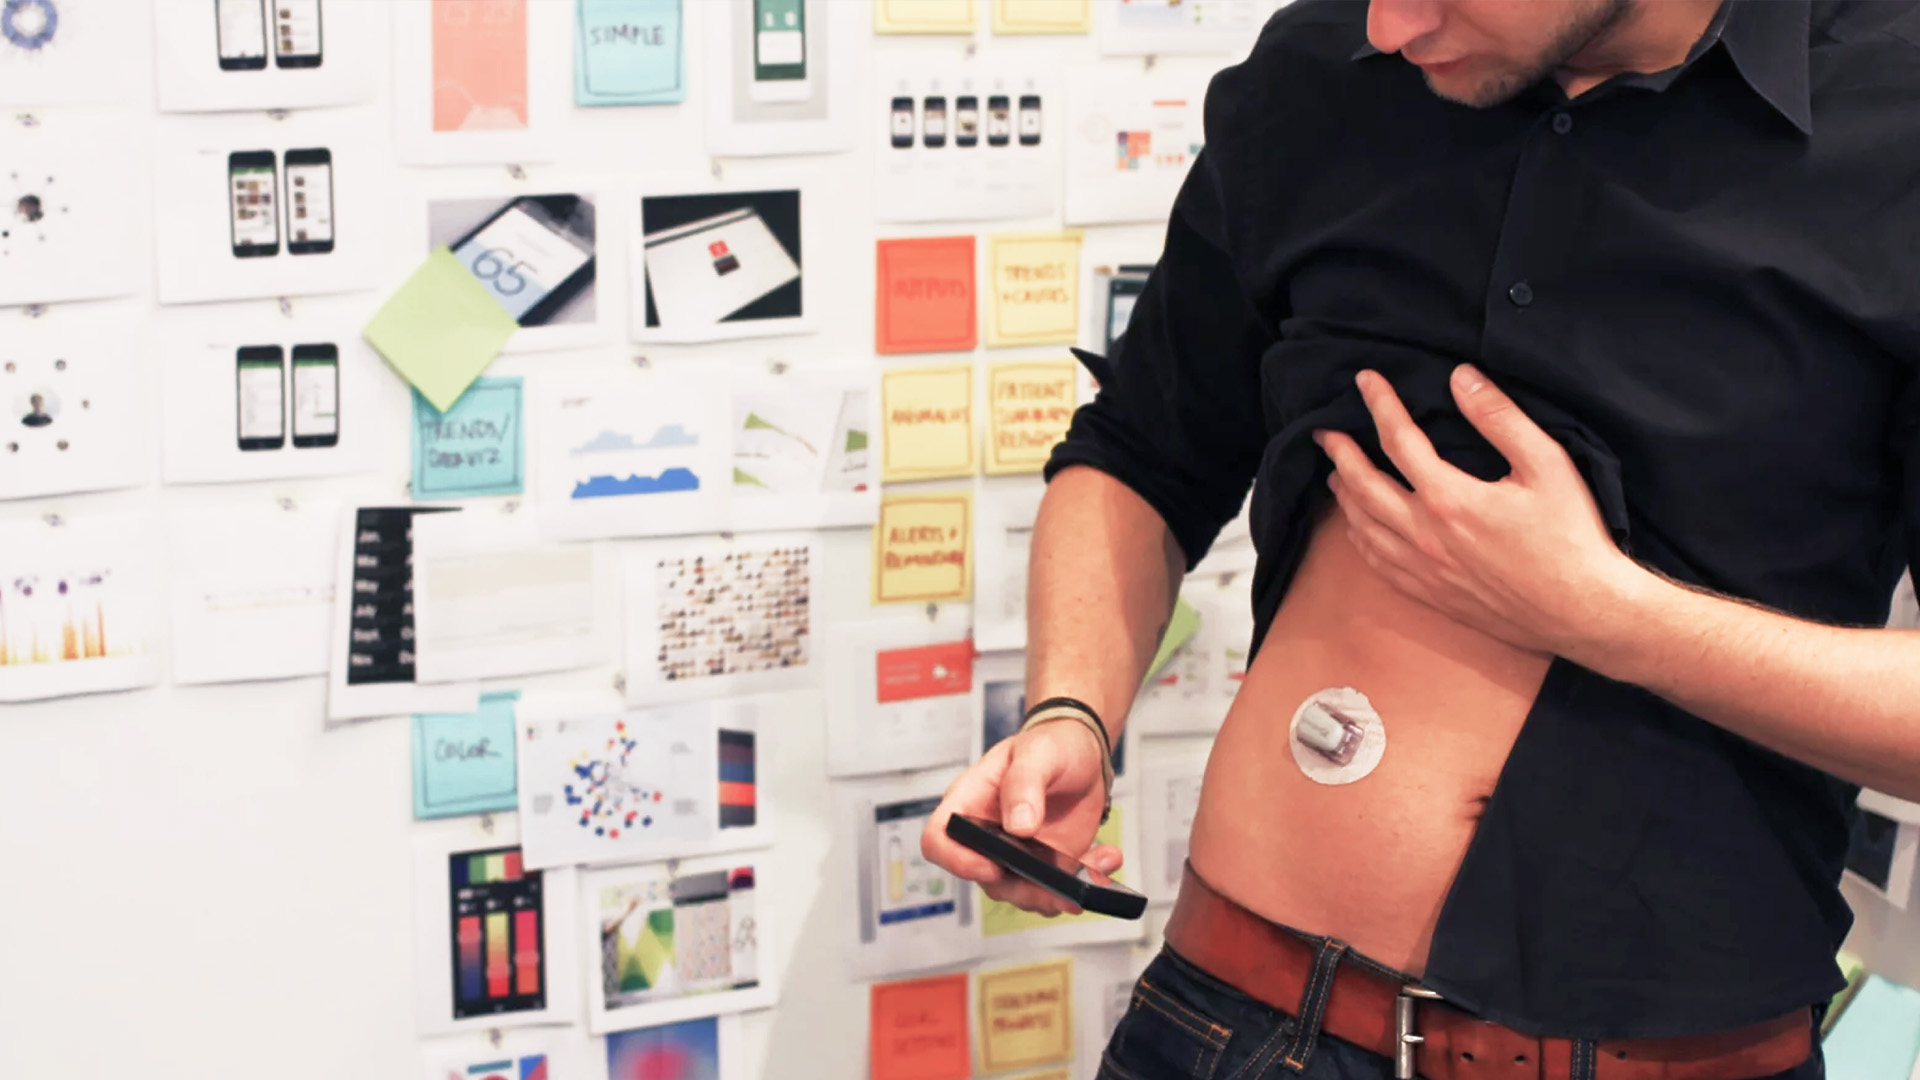 An IA Collaborative designer with stick-on medical probe attached to his abdomen, looking at smartphone app.